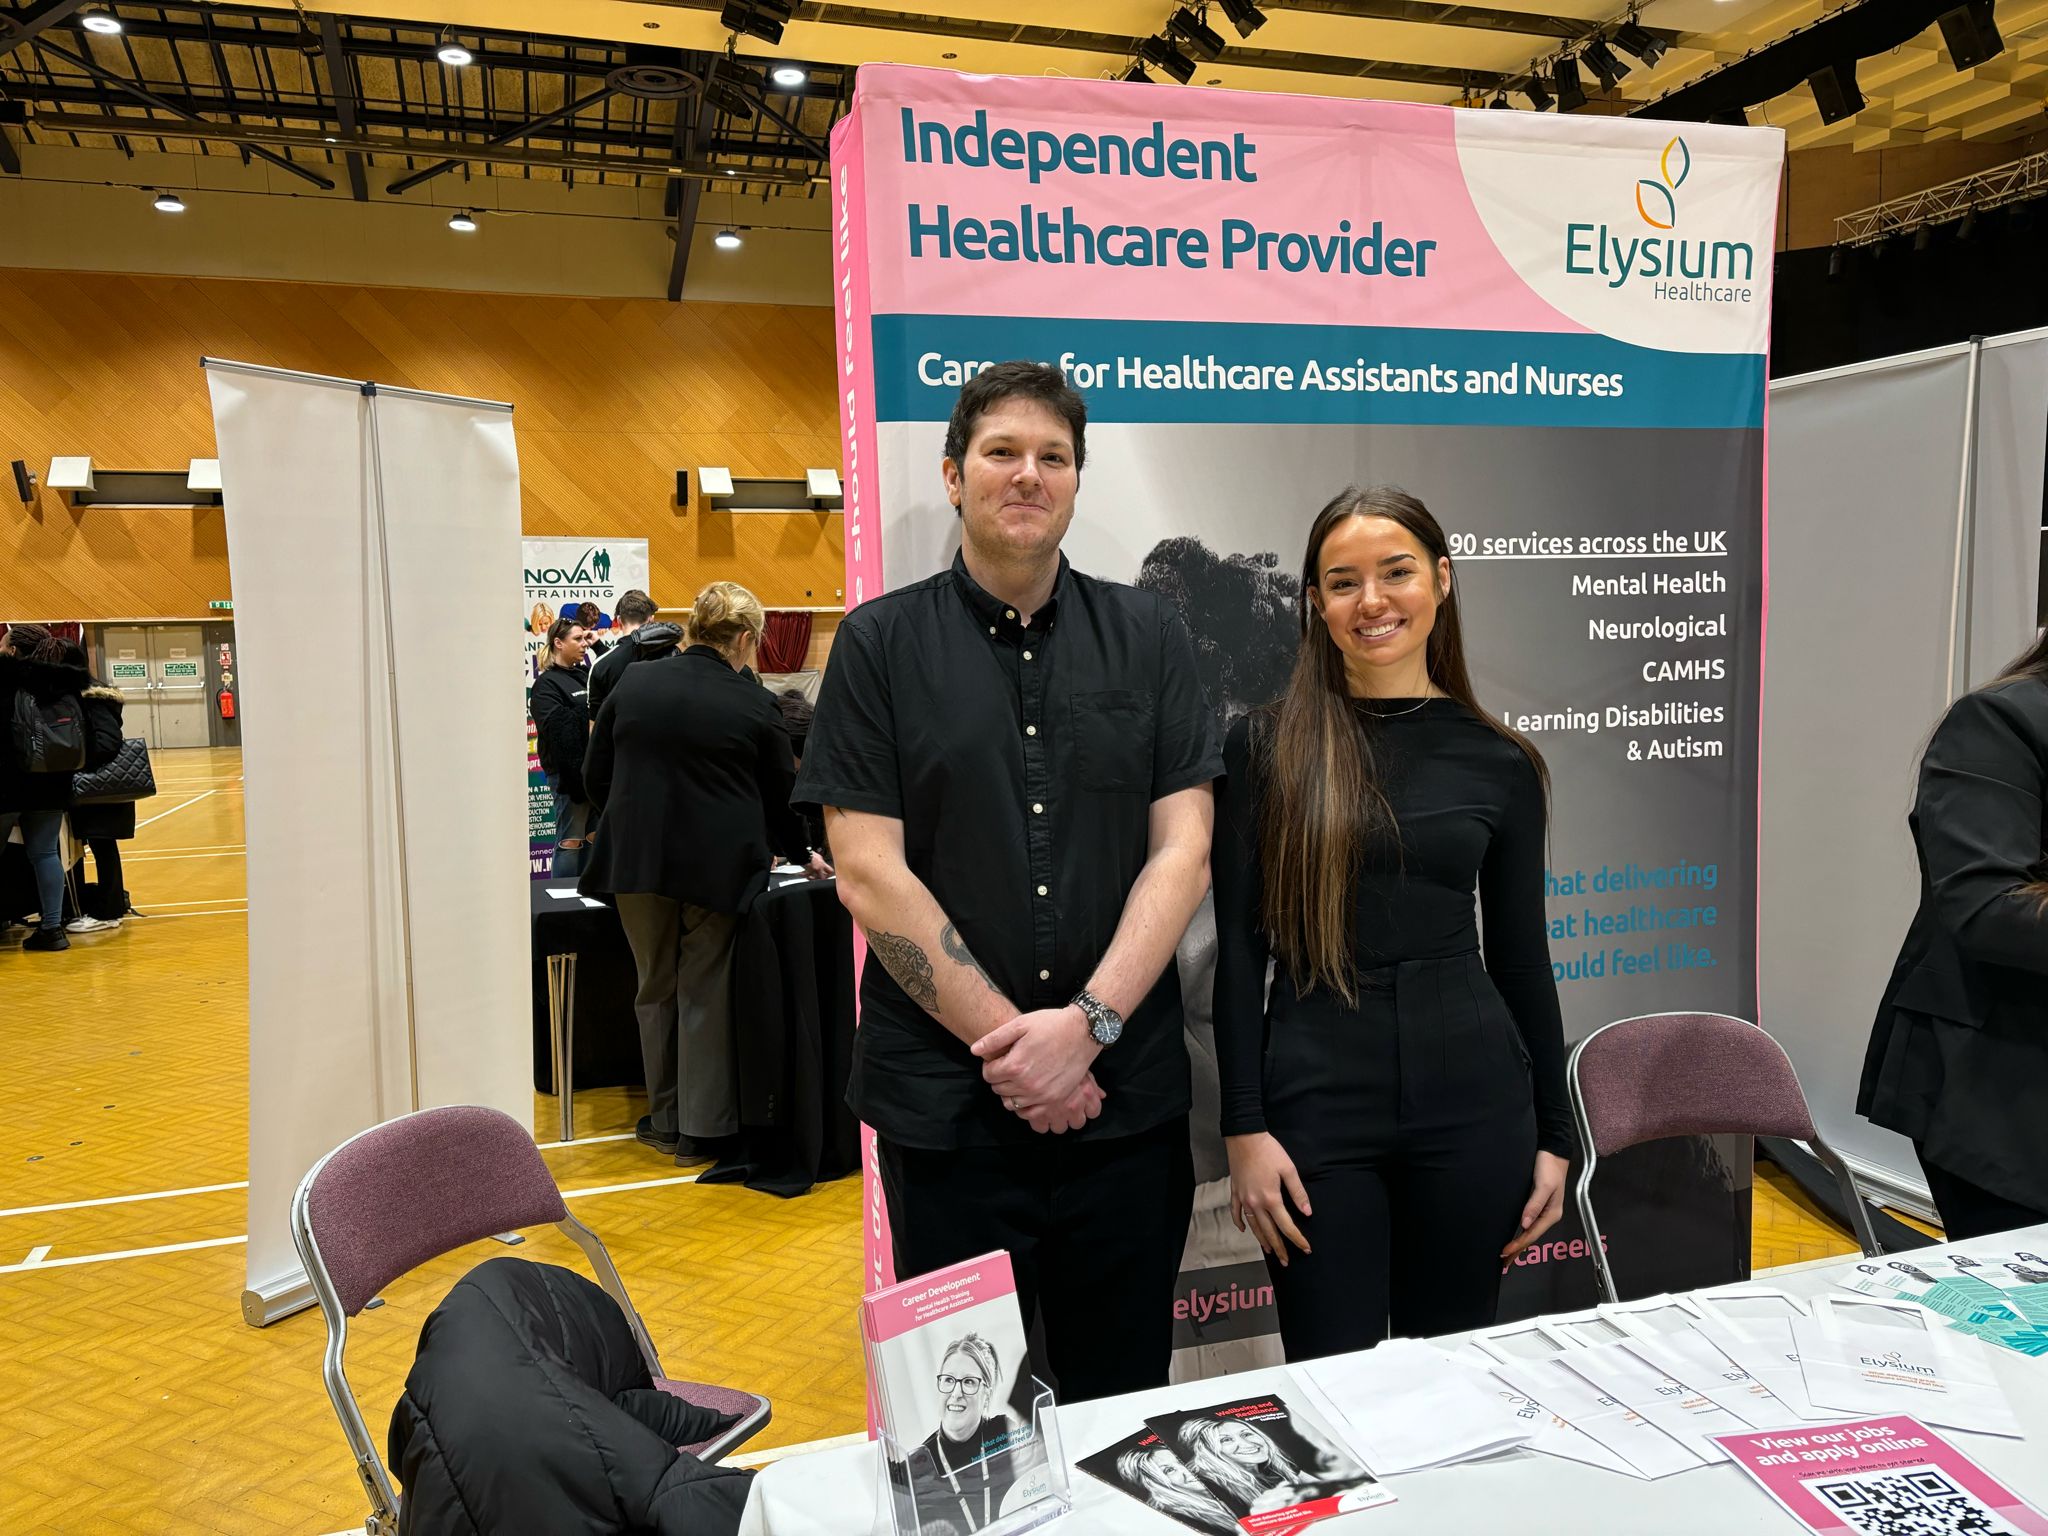 Elysium Healthcare at our event in Colchester